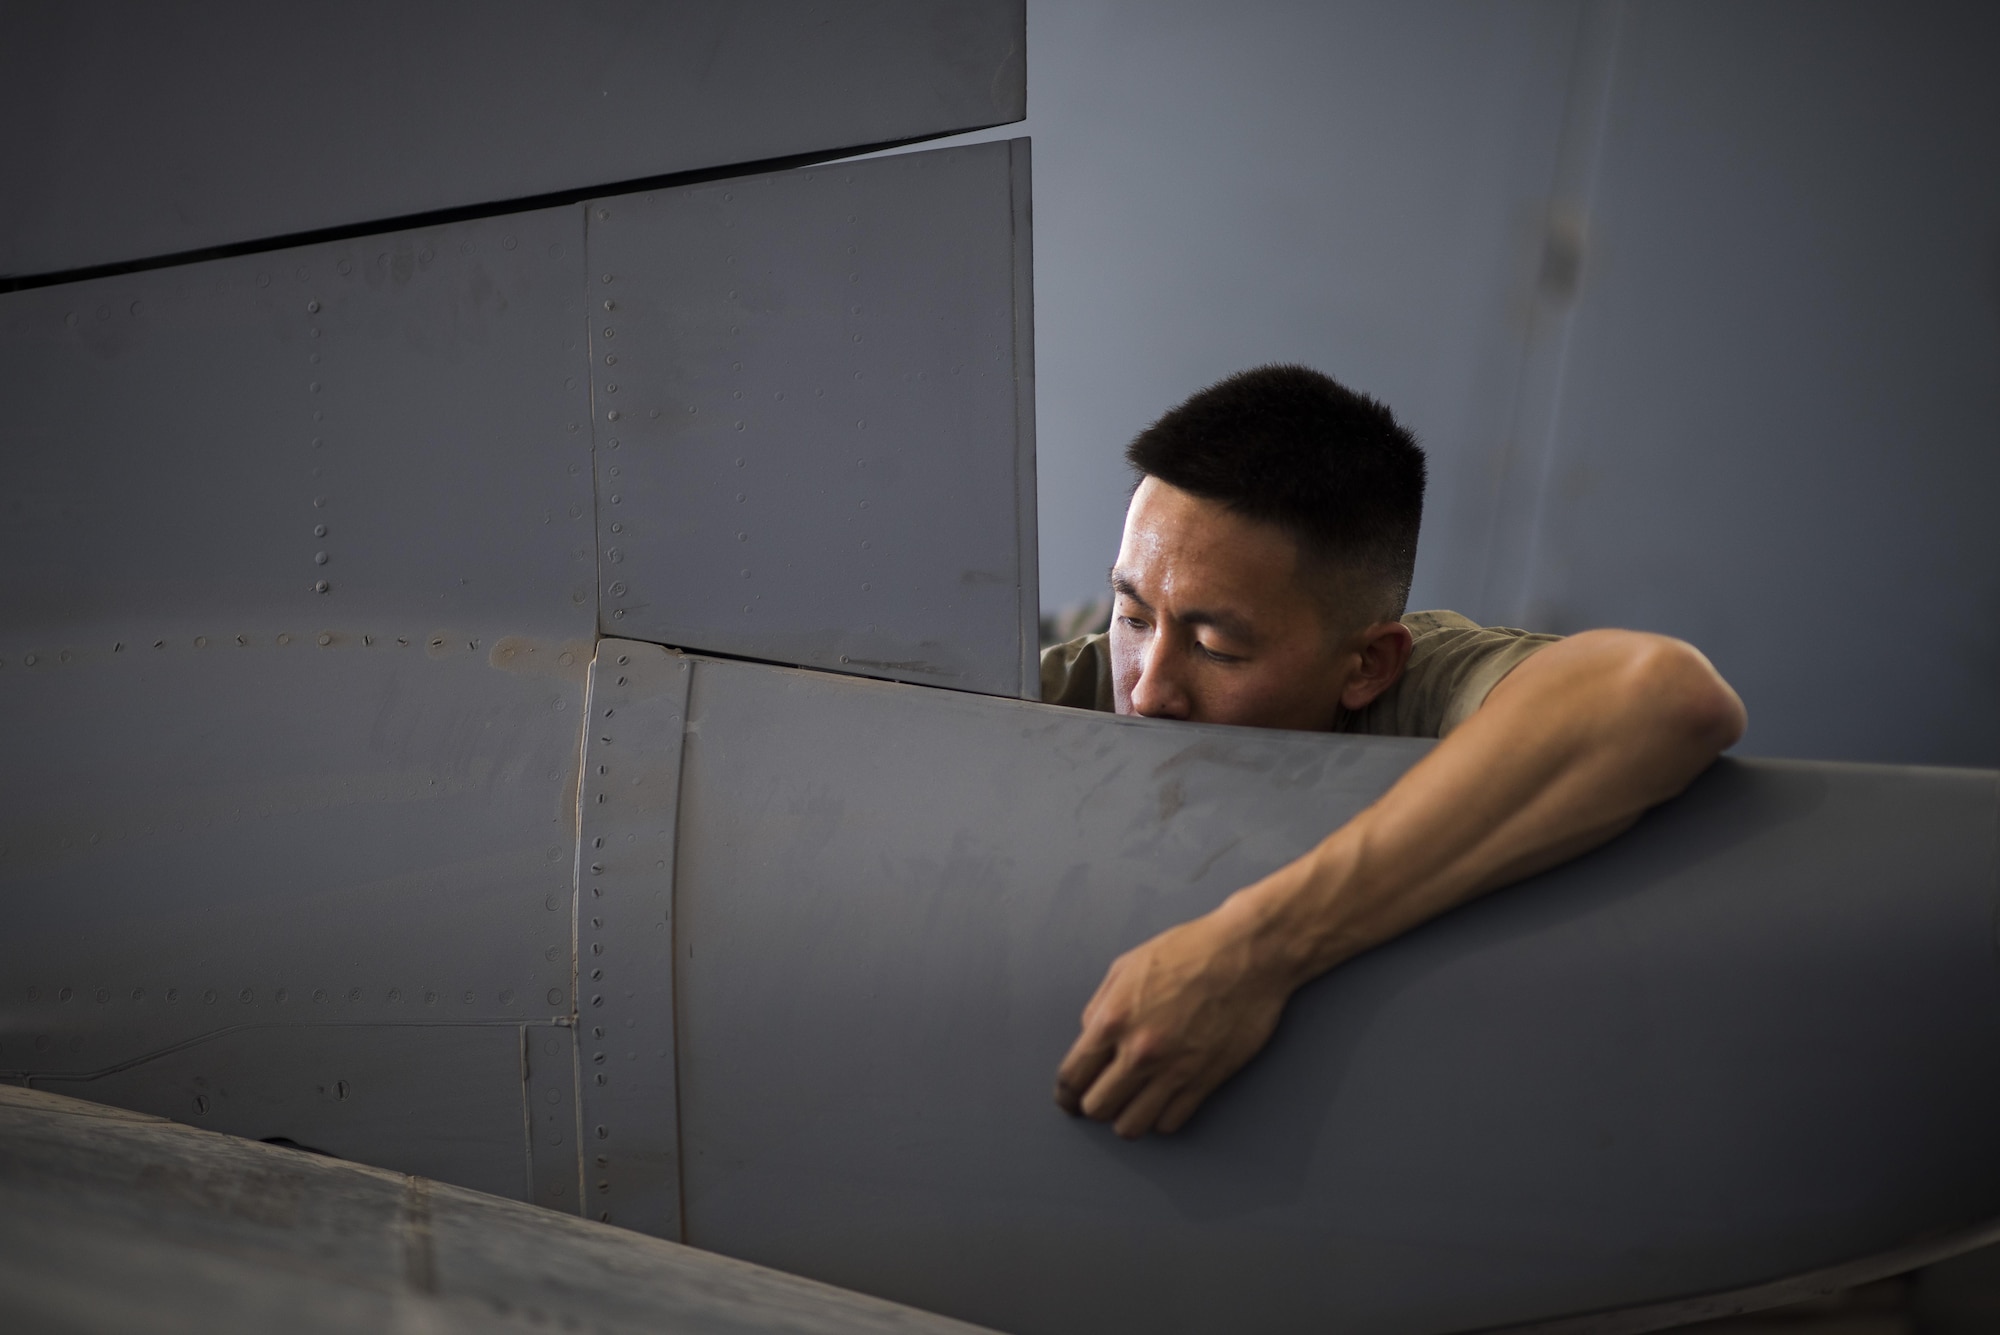 Airman 1st Class Samuel Kuo, 332nd Expeditionary Maintenance Squadron inspection section journeyman, replaces a worn horizontal stabilizer component on an F-15E Strike Eagle, June 16, 2017, in Southwest Asia. Maintainers work throughout the day and night to complete their job and ensure the F-15Es are operational. (U.S. Air Force photo/Senior Airman Damon Kasberg)